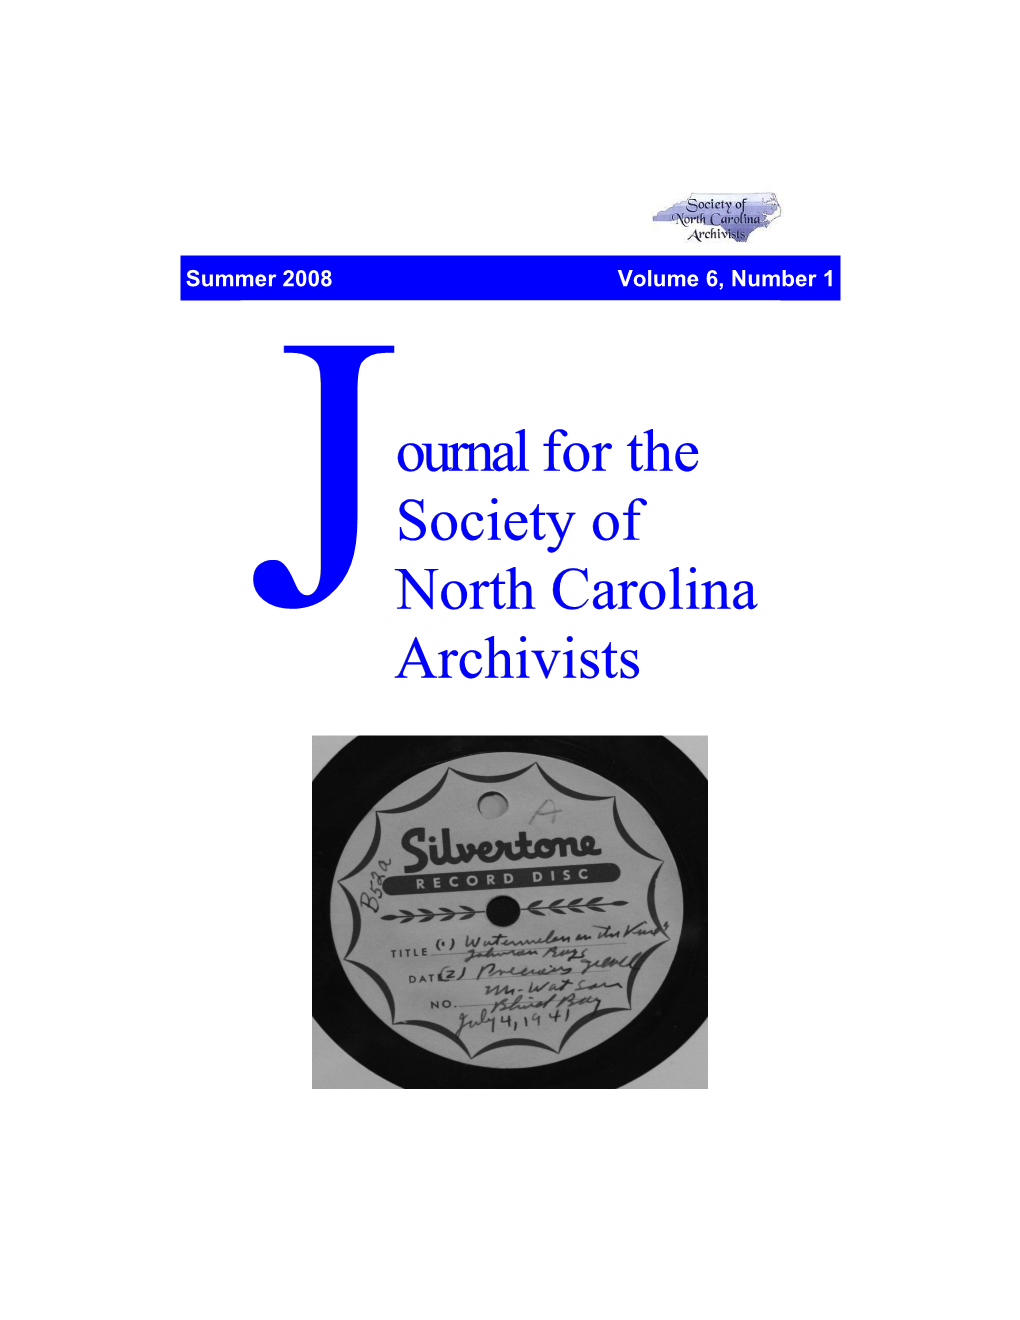 Journal for the Society of North Carolina Archivists, Vol. 6, No. 1